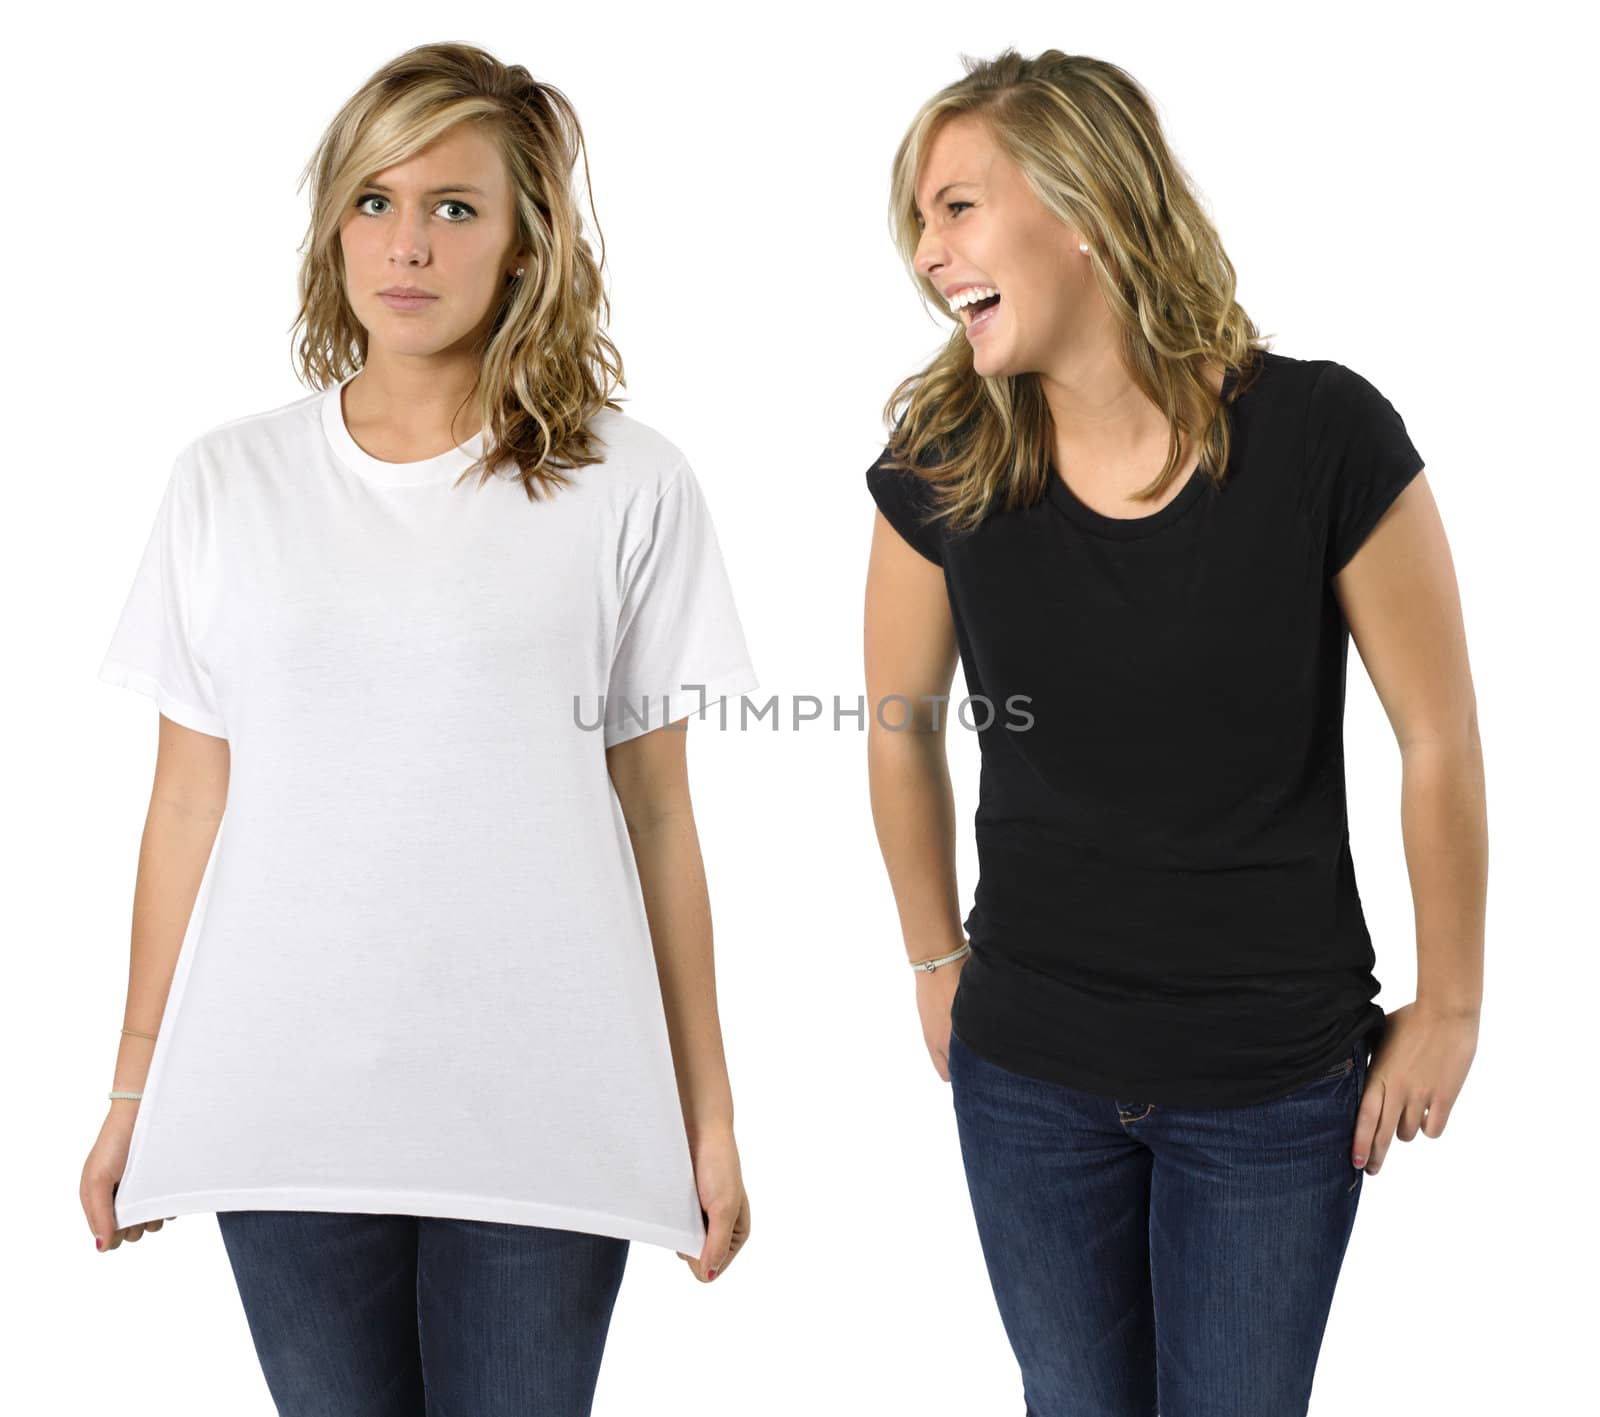 Young beautiful blond female with blank black shirt and white shirt. Ready for your design or logo.